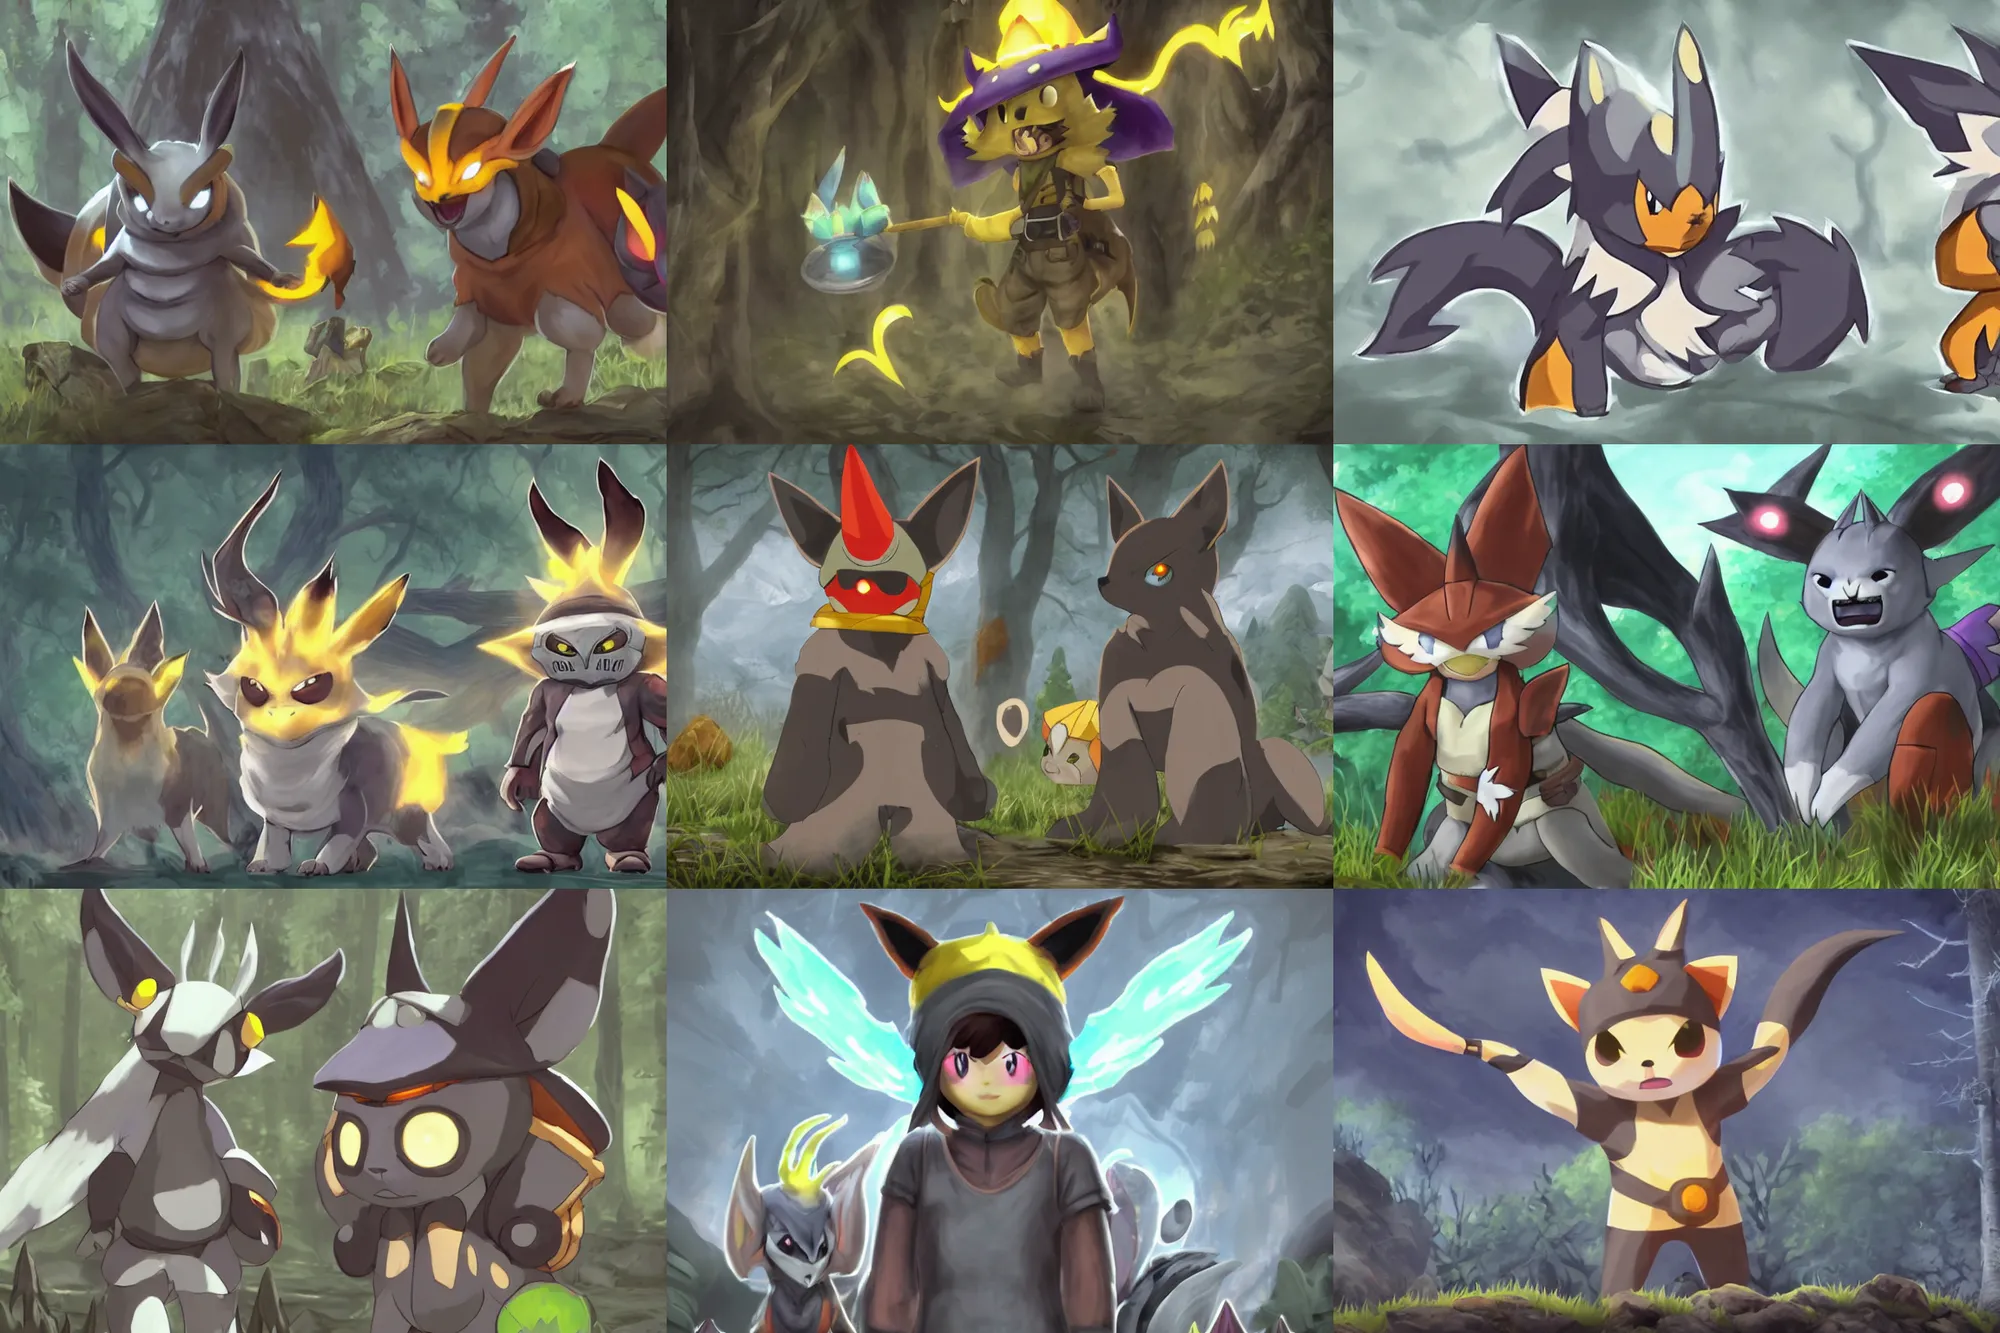 Prompt: trailcam footage grayscale low saturation video game elden clay growlithe reprisal star resident evil unreal engine mismagius mystery skyrim dungeon ultrahd resident eevee wearing bandanna standing under giratina, maidenless wearing witch hat pokemon